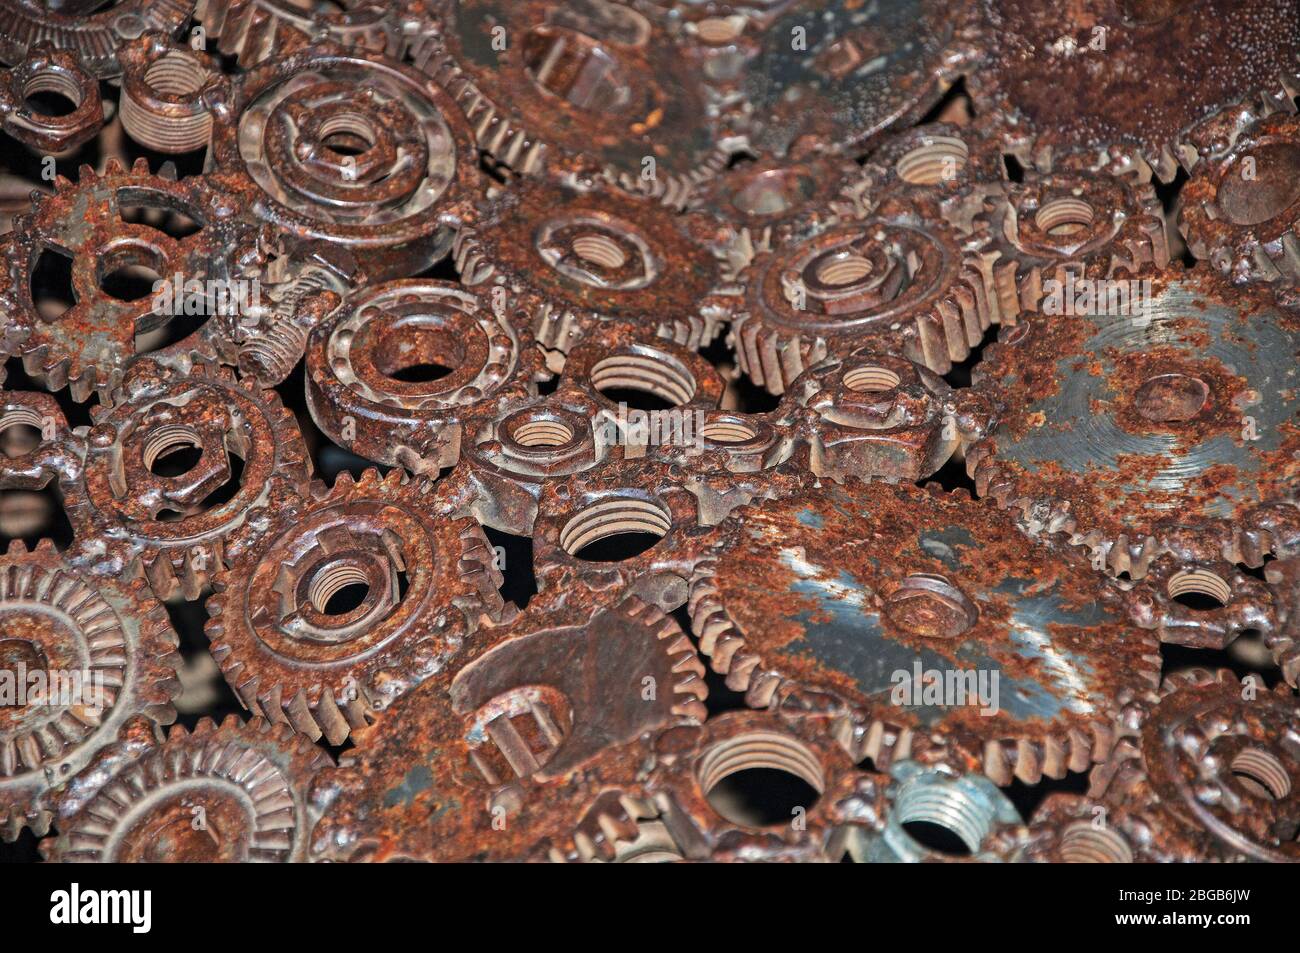 Old, worn, rough mechanical gears made of rusty metal. Design minimalism. Iron composition. Retro style. Stylish top and trendy design background text Stock Photo